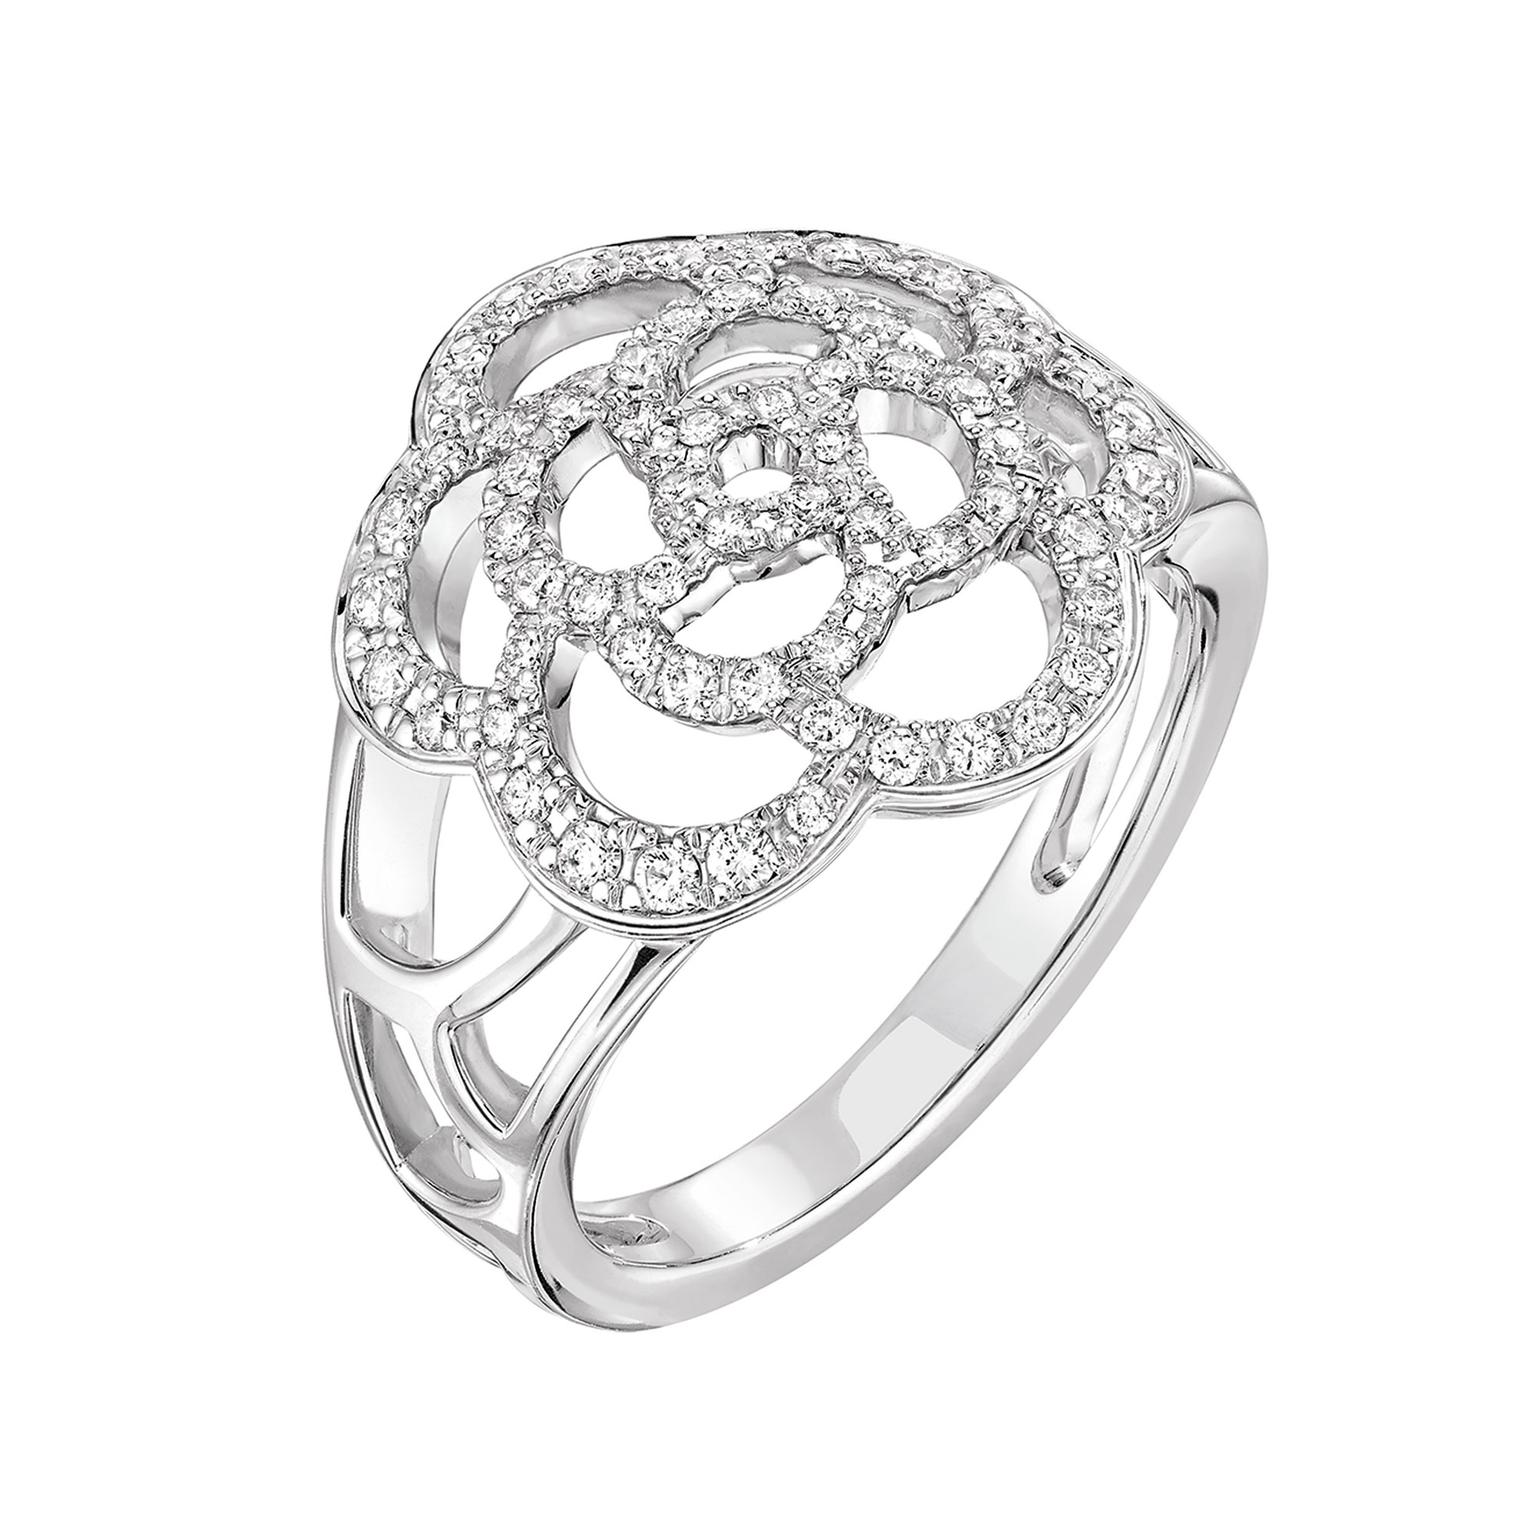 Chanel Bague Camélia diamond ring in white gold